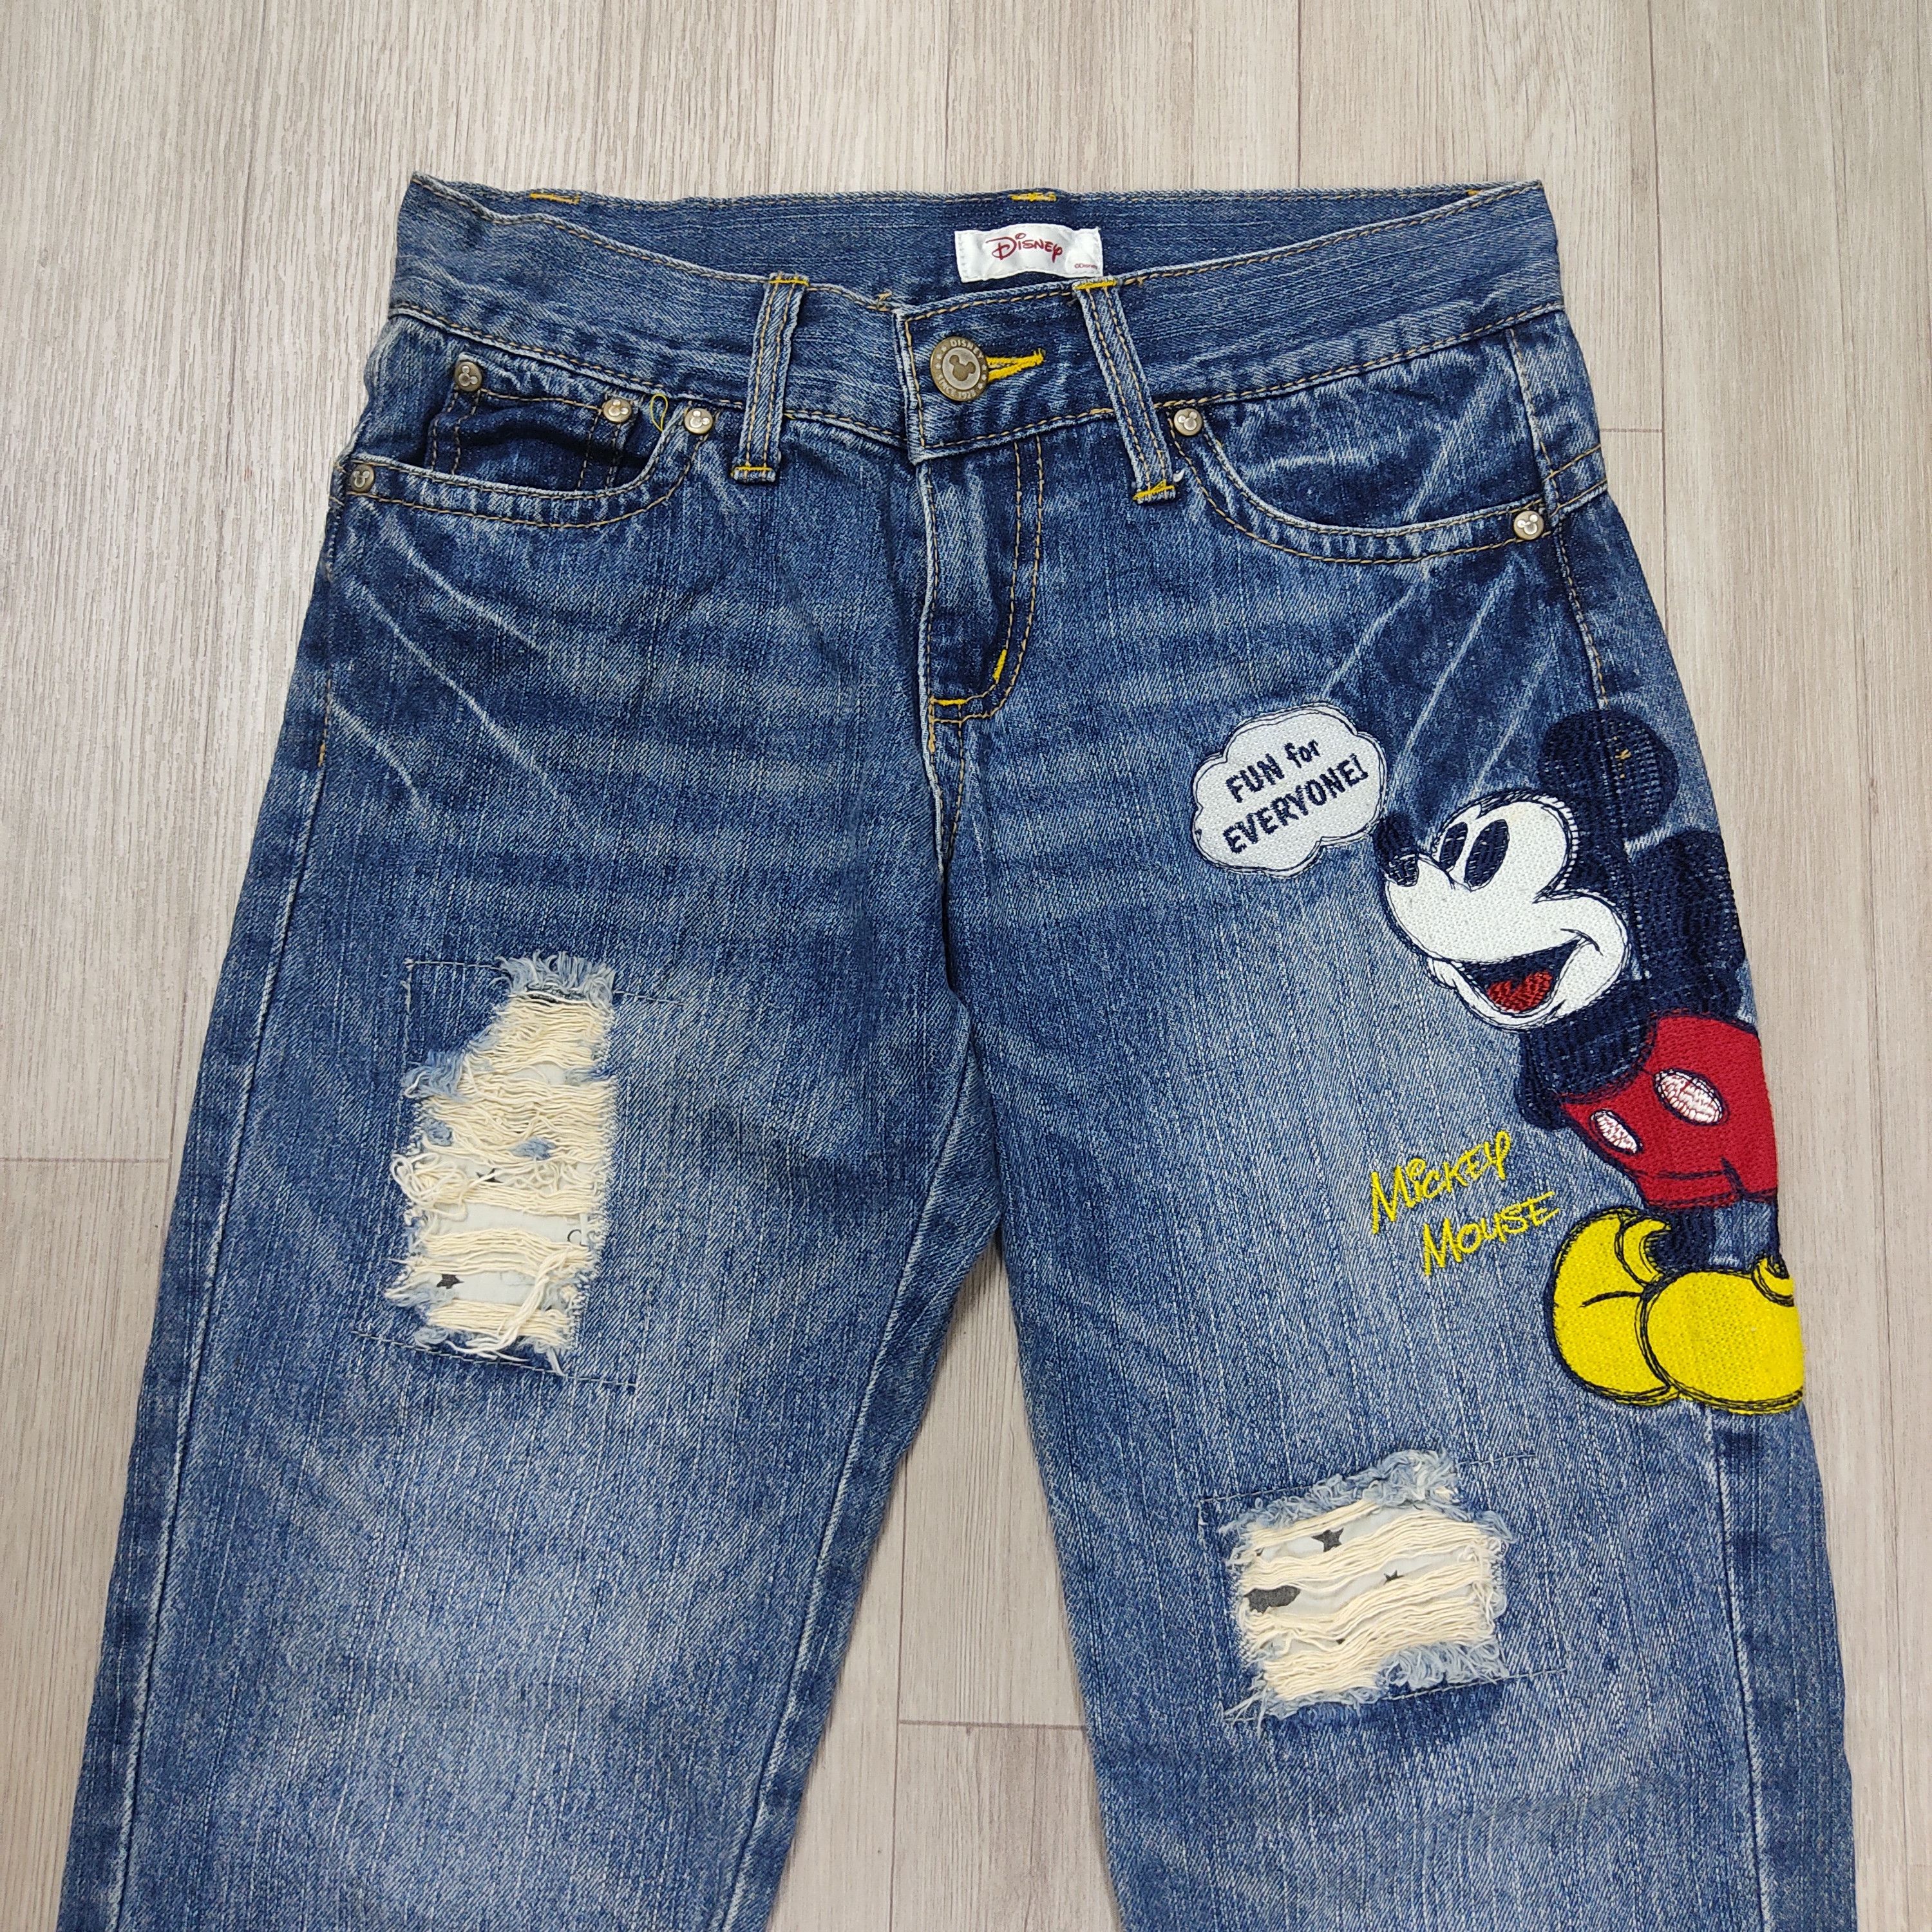 Disney MICKEY MOUSE Embroidered Distressed Denim Pants - 3